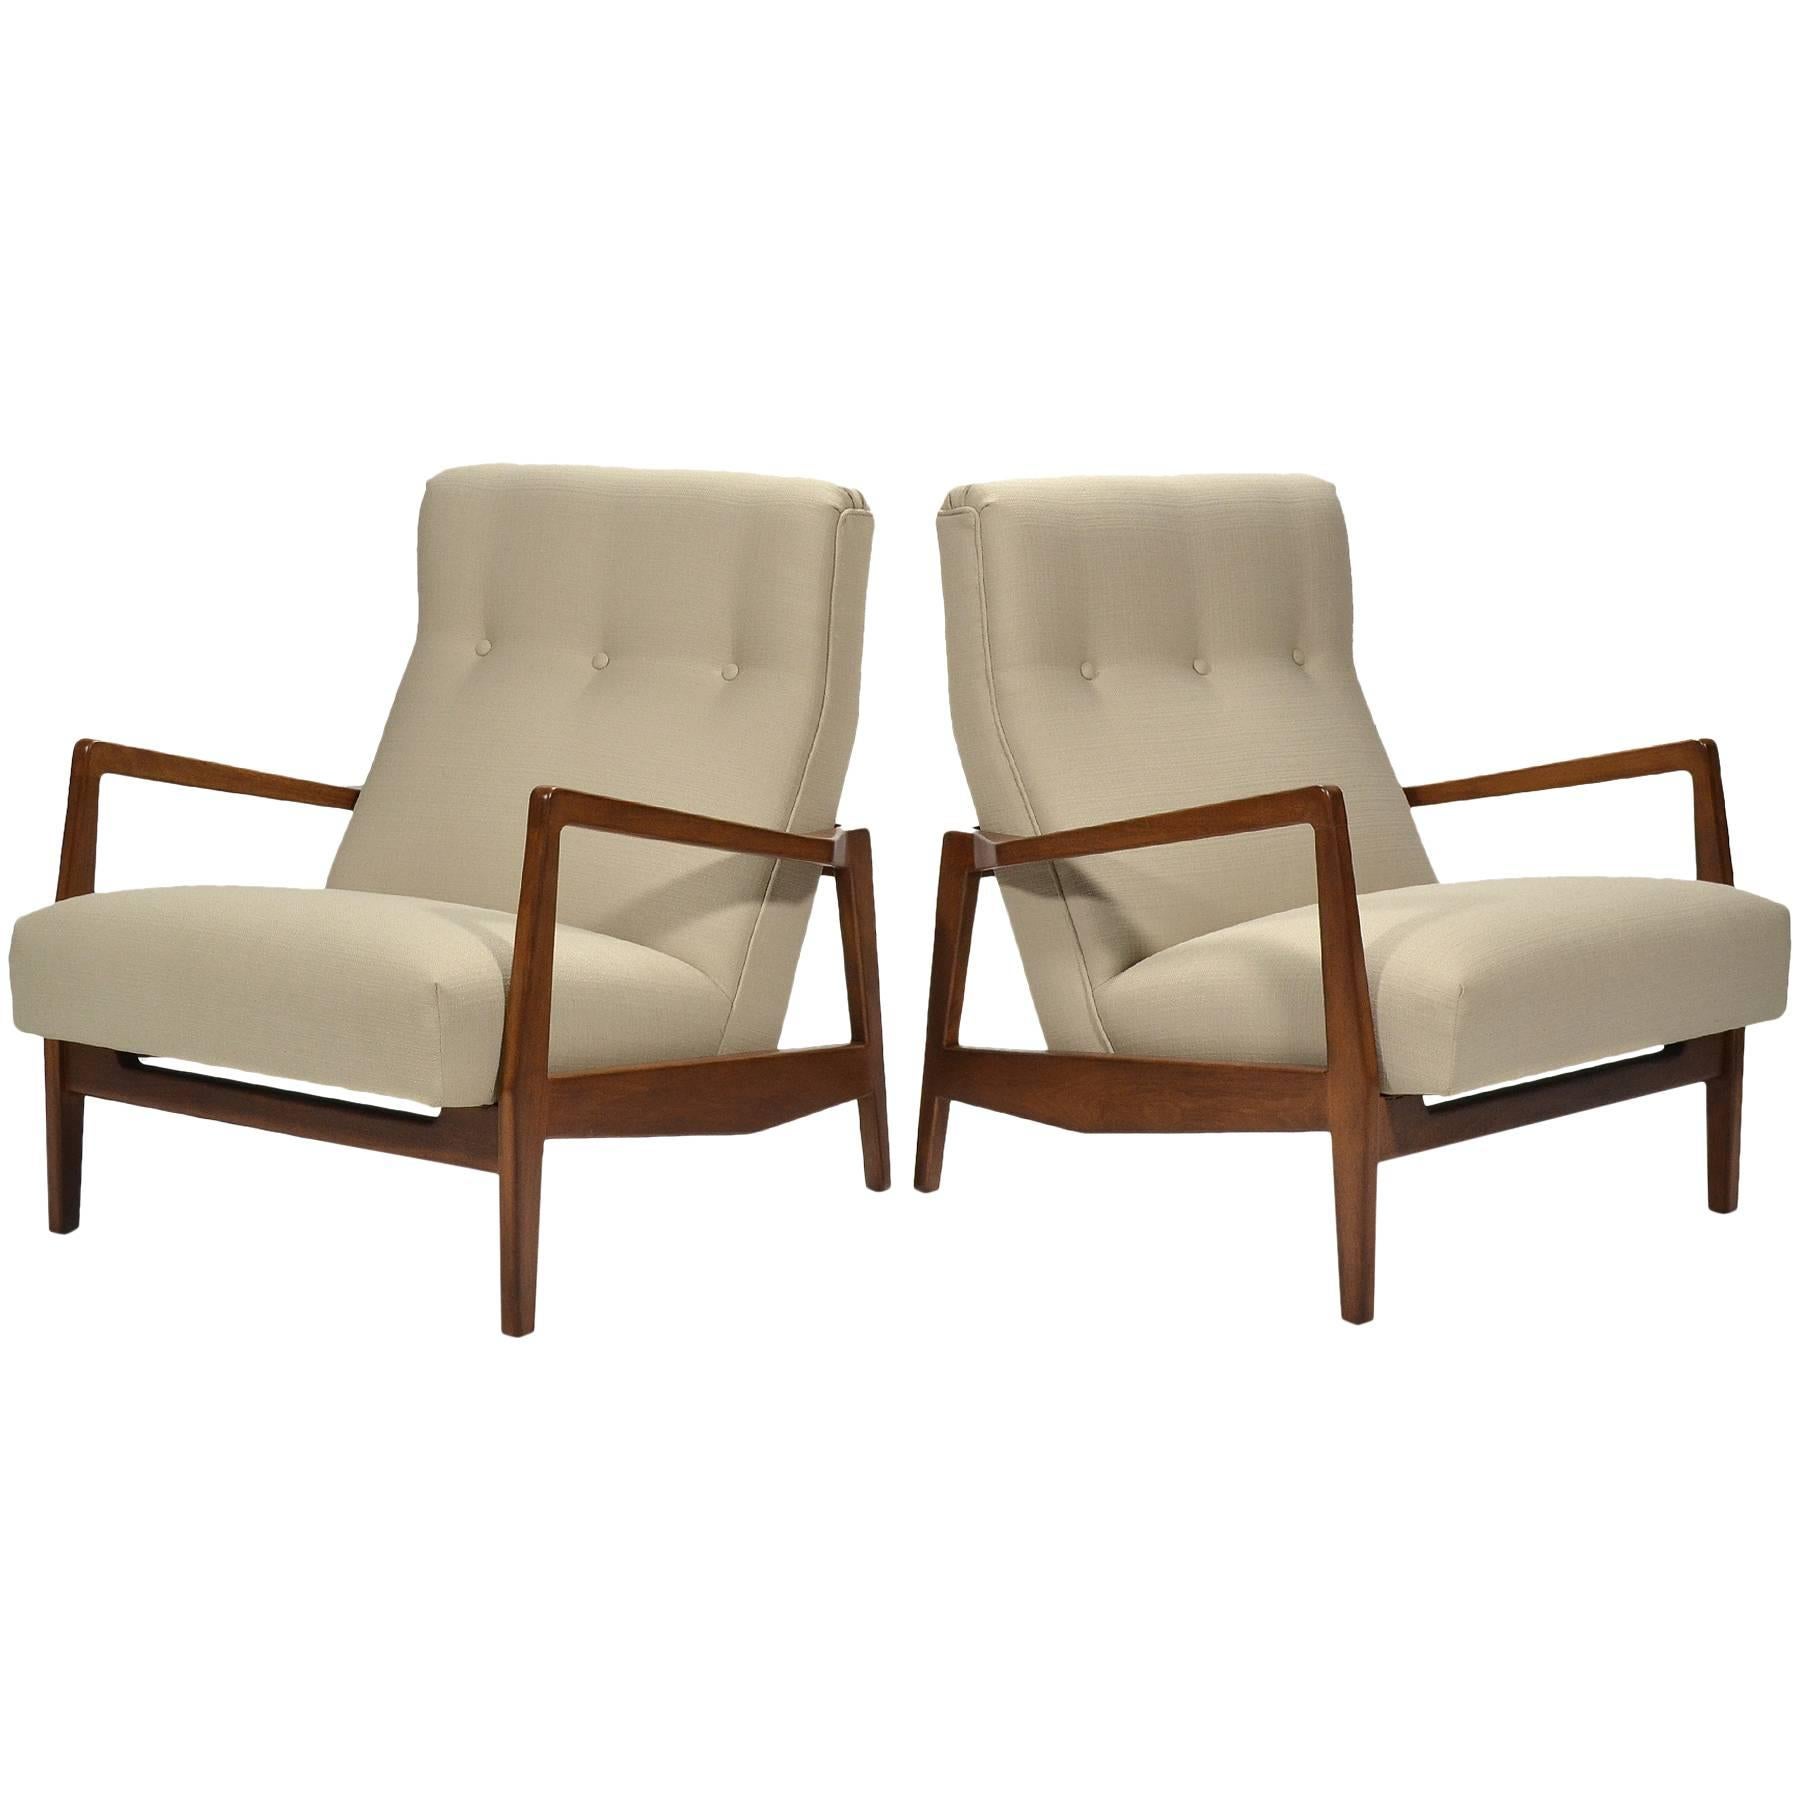 Jens Risom Pair of Lounge Chairs